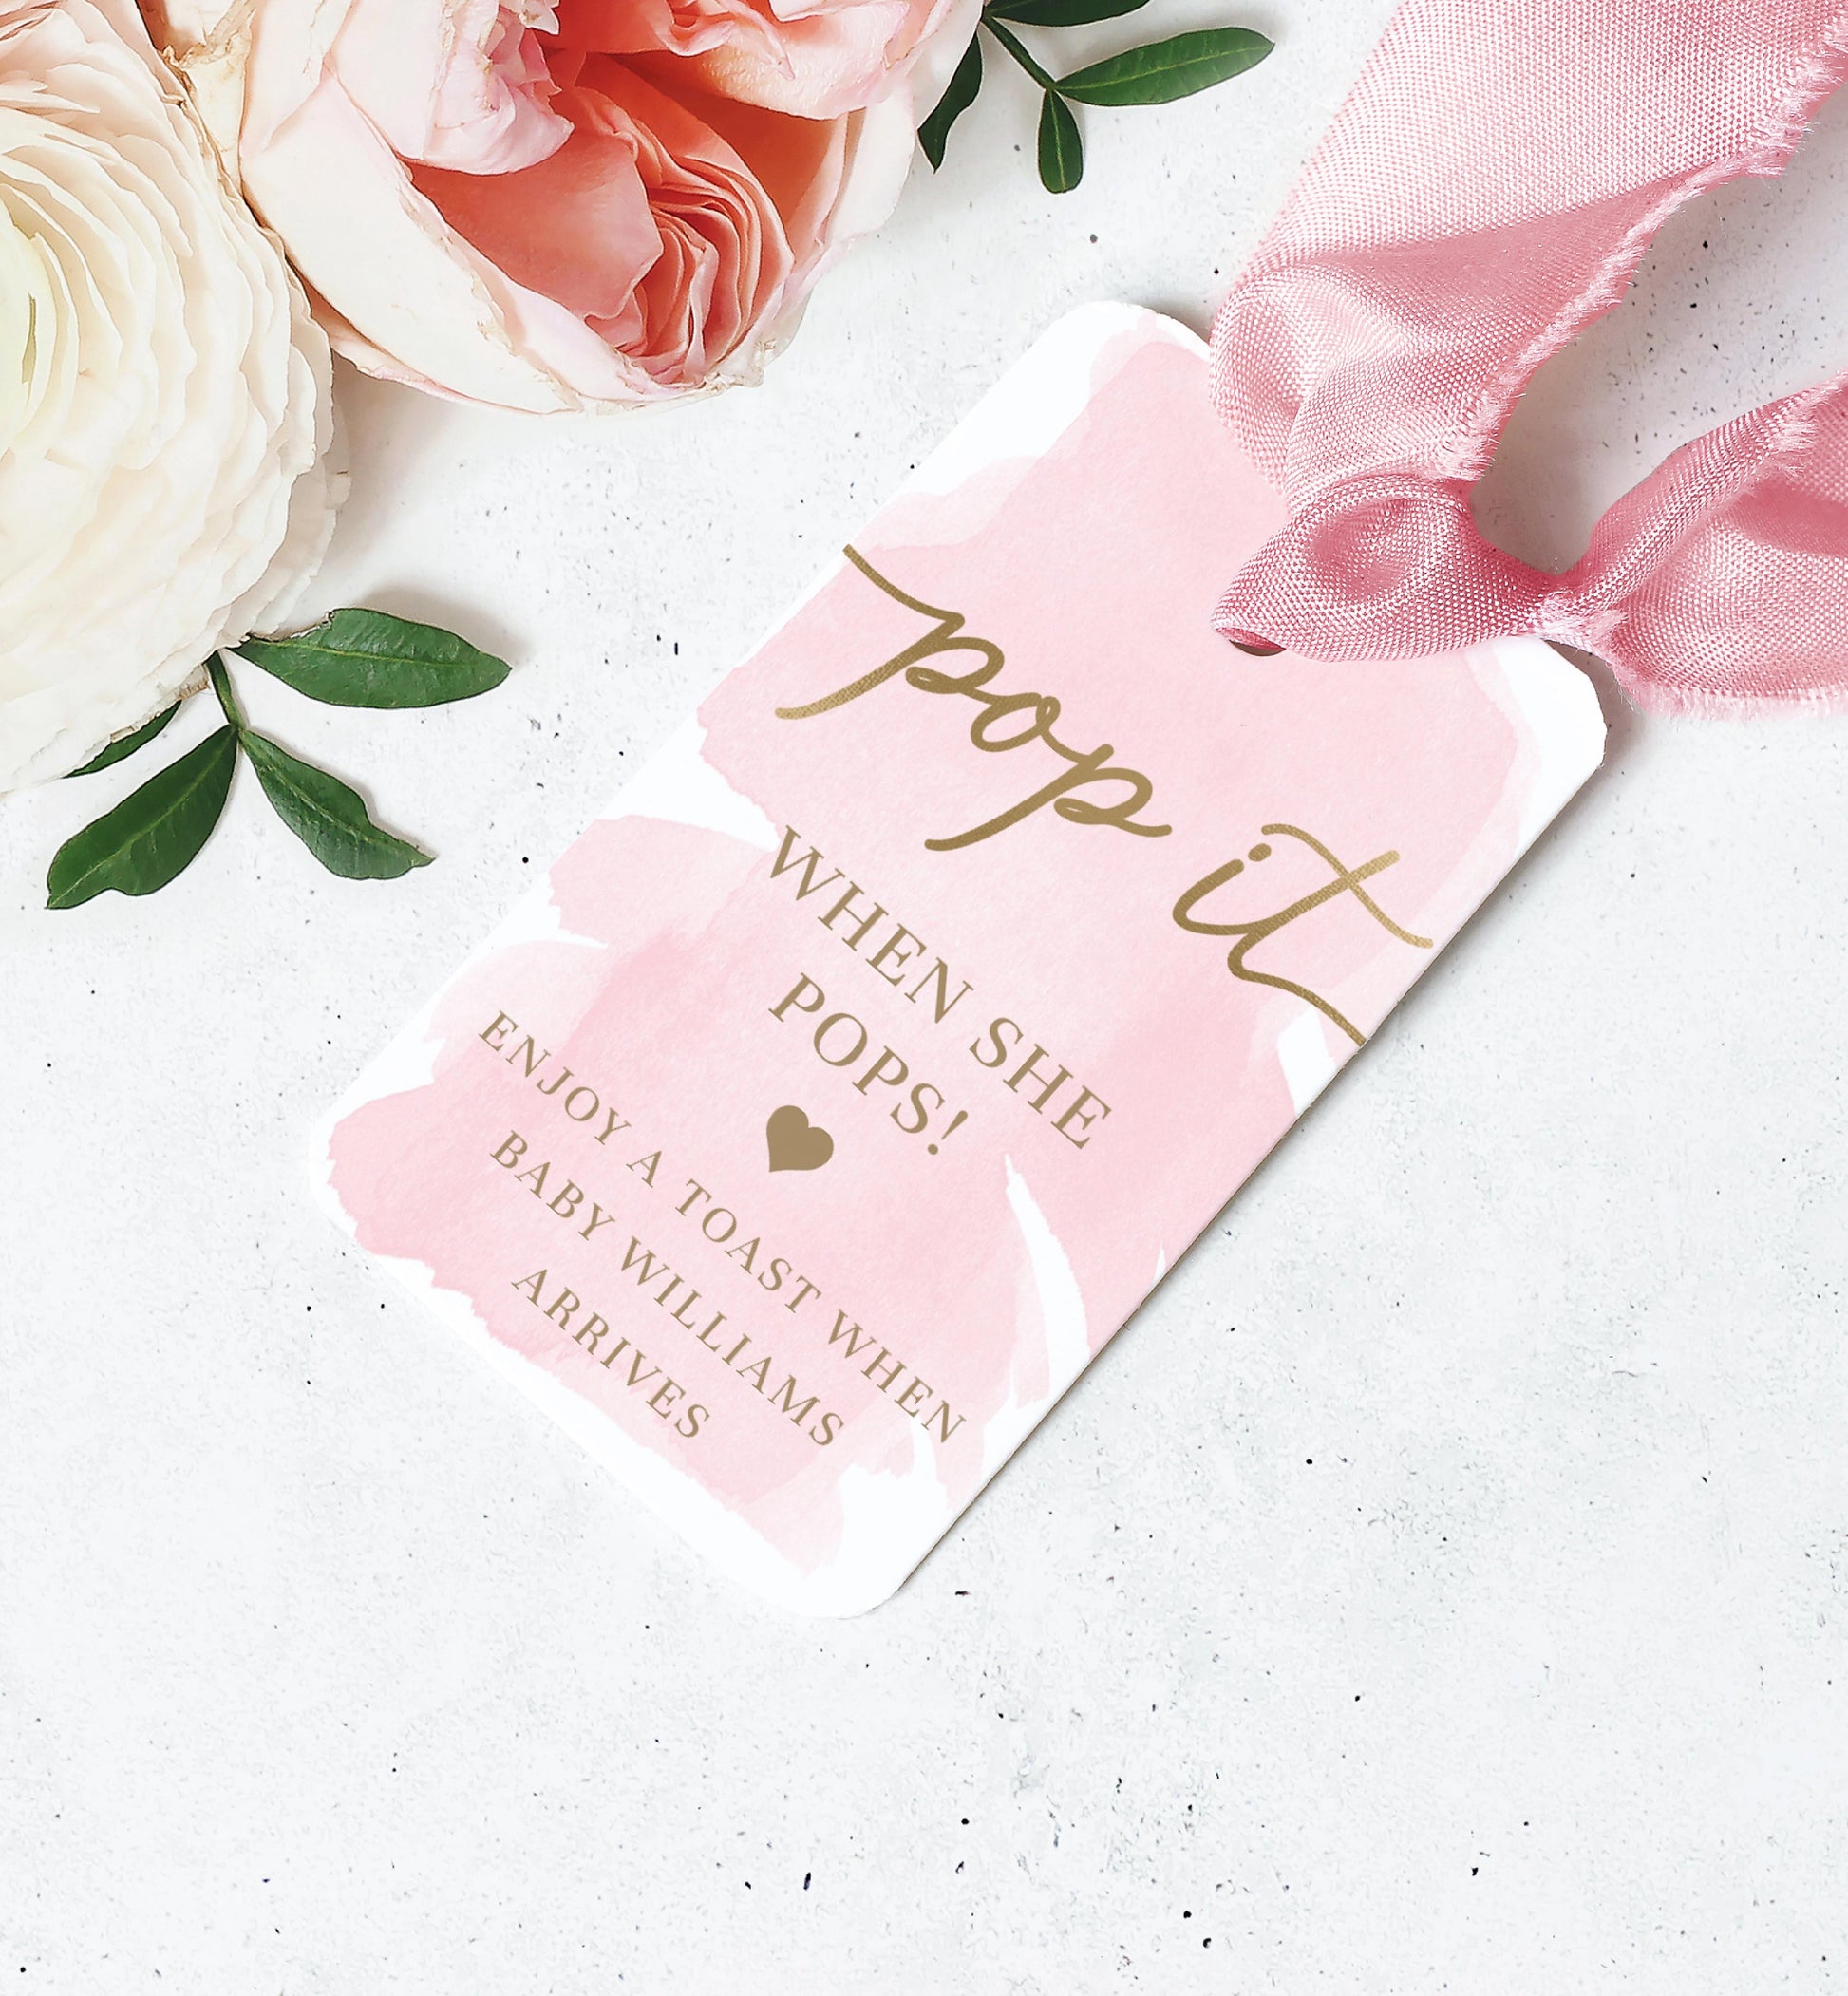 Pop It When She Pops Favor Tag Template, Baby Shower Champagne Pop It Favor Tag Printable, Pink Watercolor Mini Champagne Wine Bottle Favor Tag